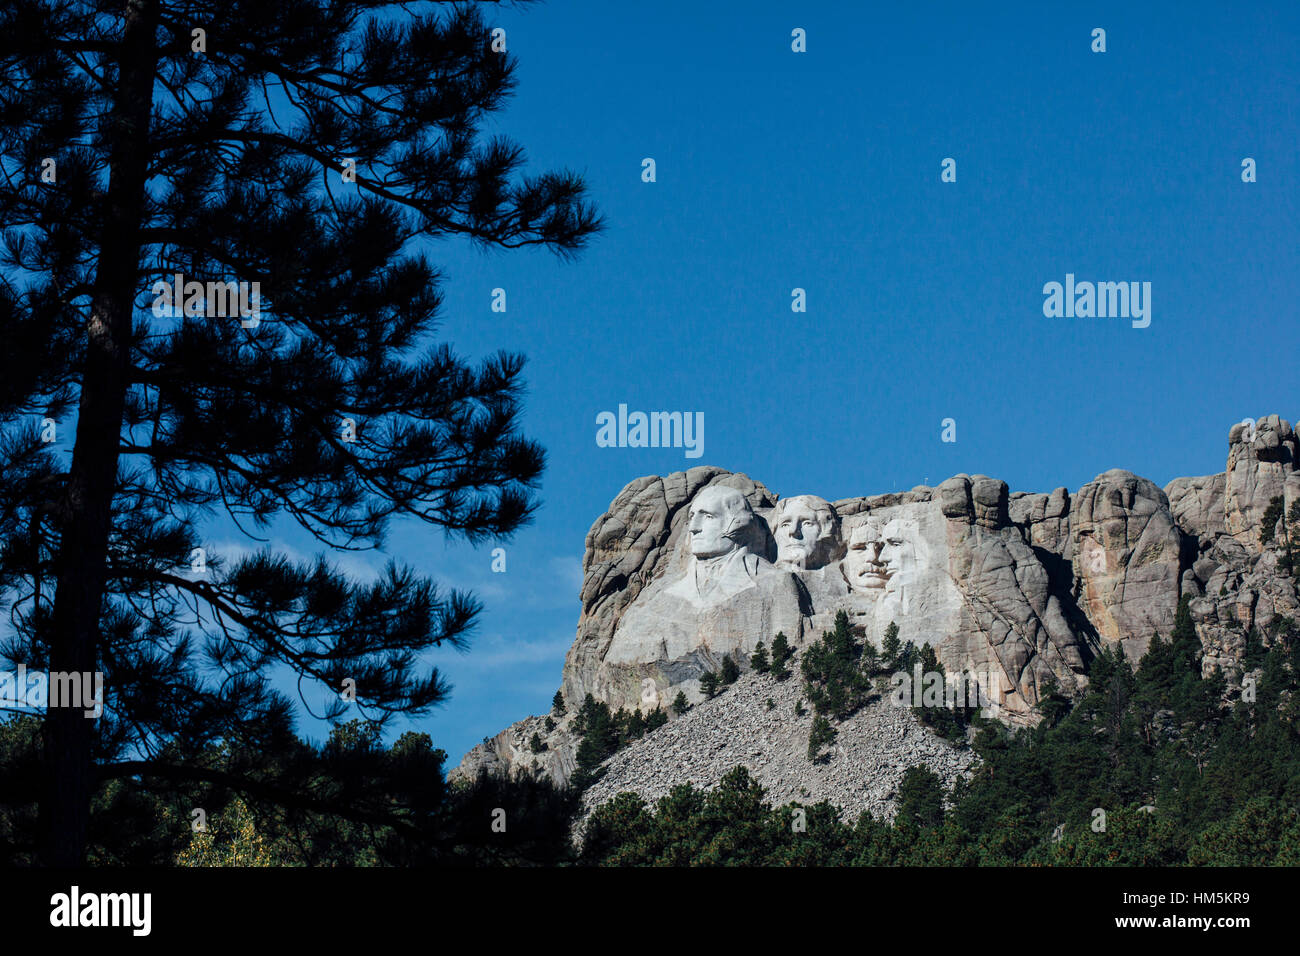 View of Mt Rushmore national monument against blue sky Stock Photo